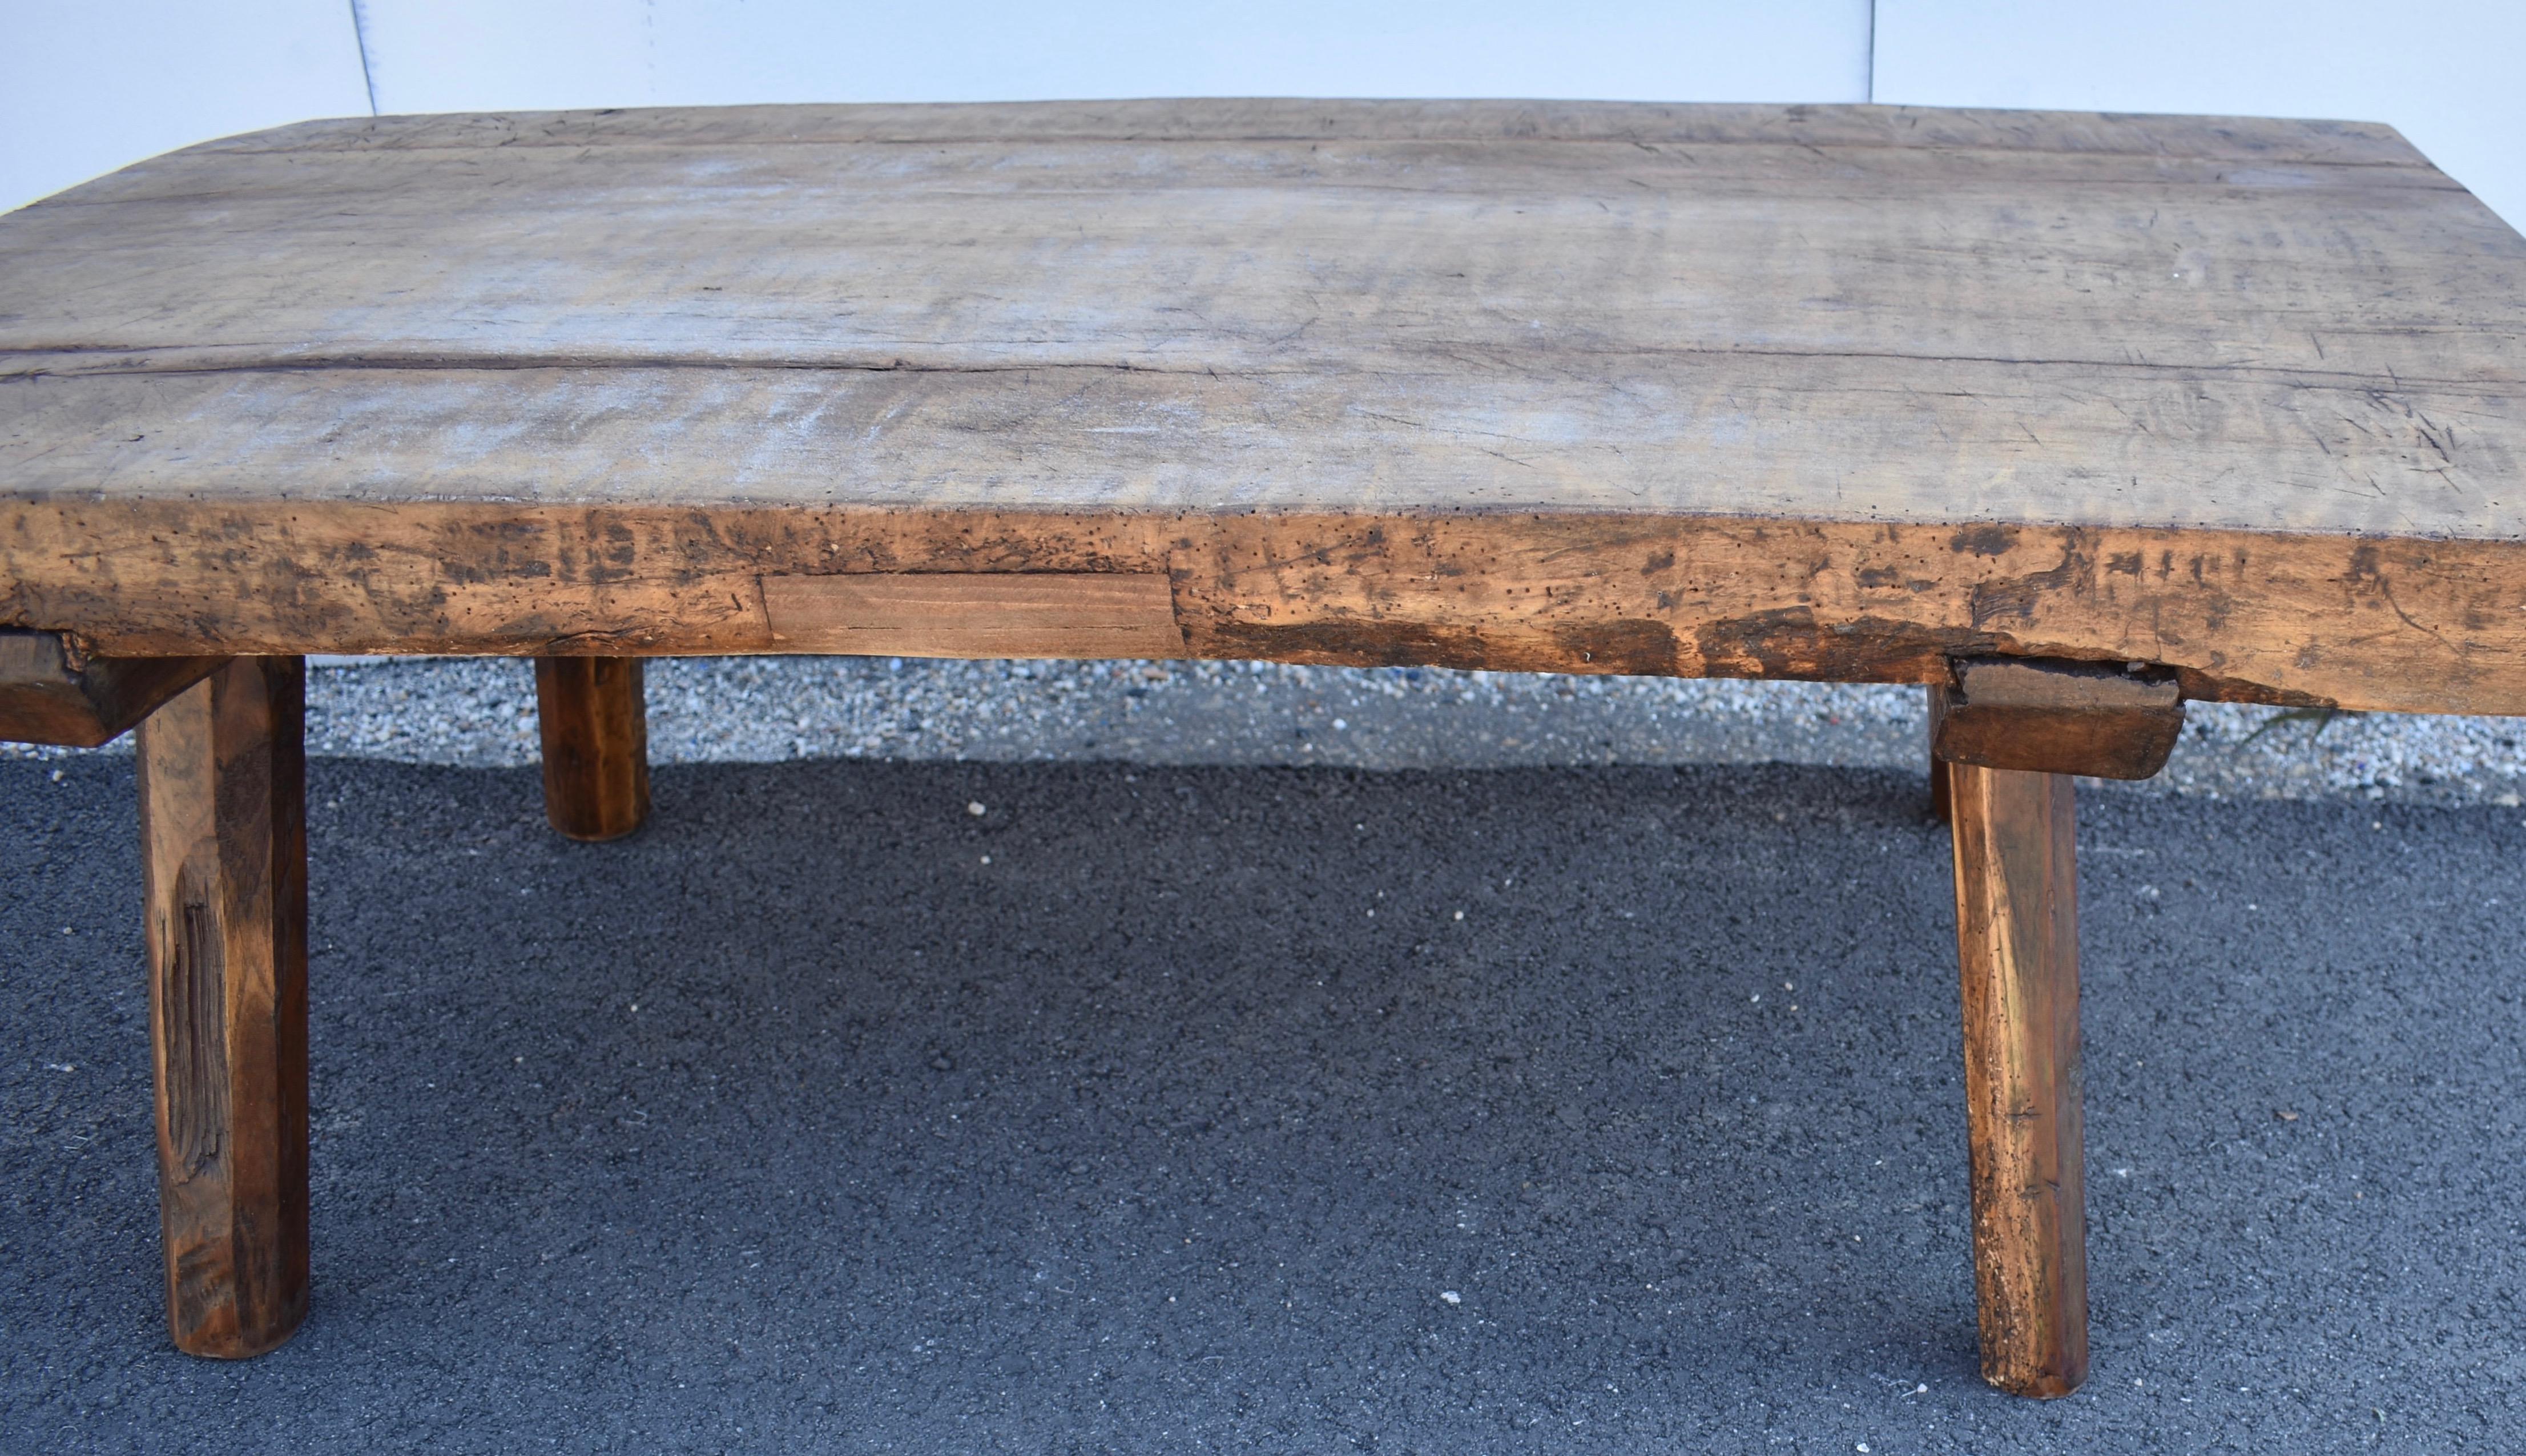 20th Century Oak Pig Bench Butcher's Block Coffee Table For Sale